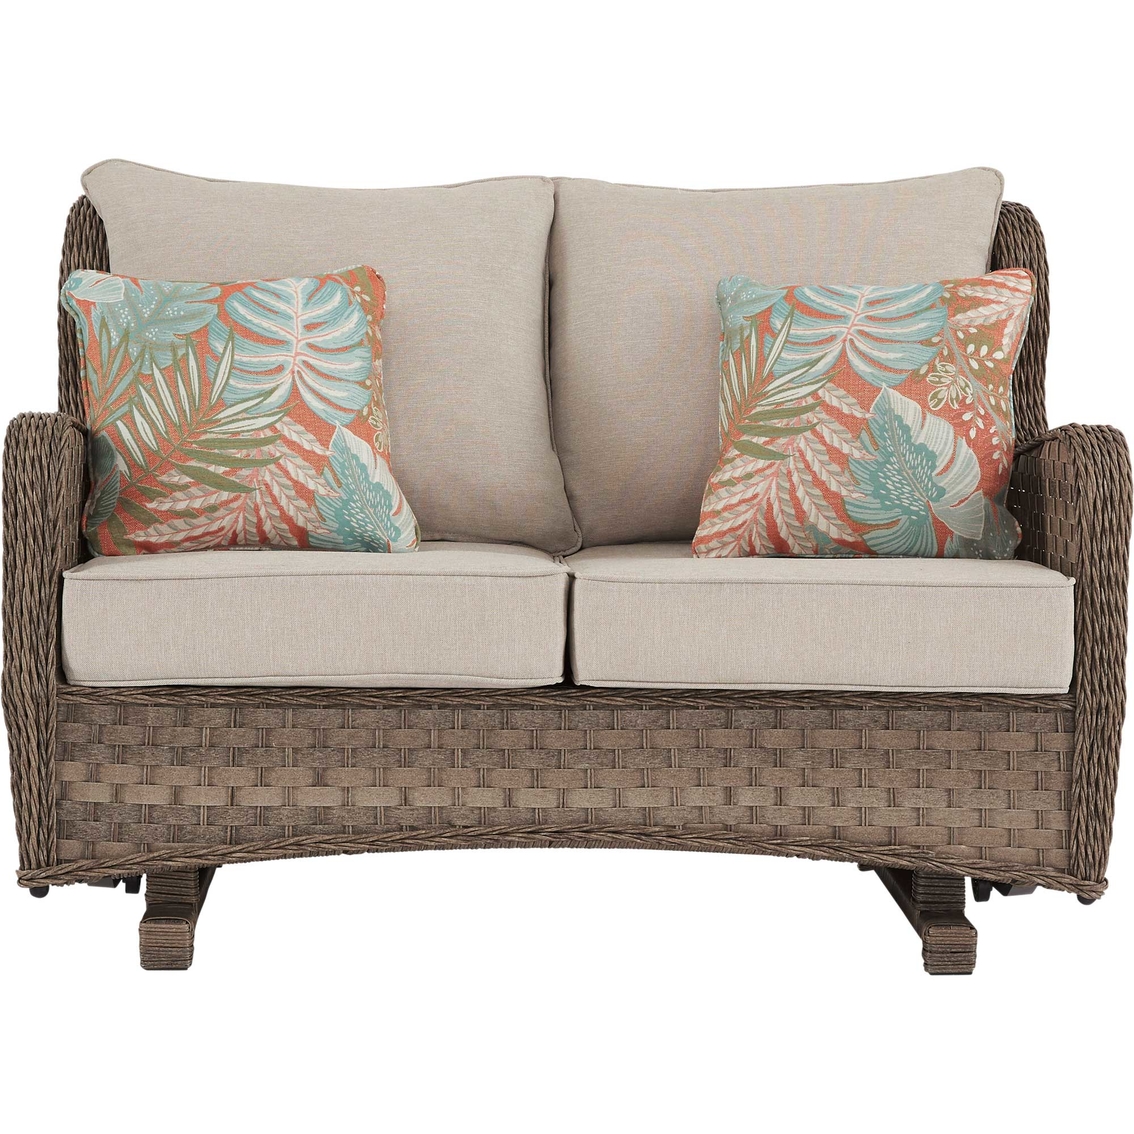 Signature Design by Ashley Clear Ridge Outdoor Loveseat Glider - Image 3 of 7